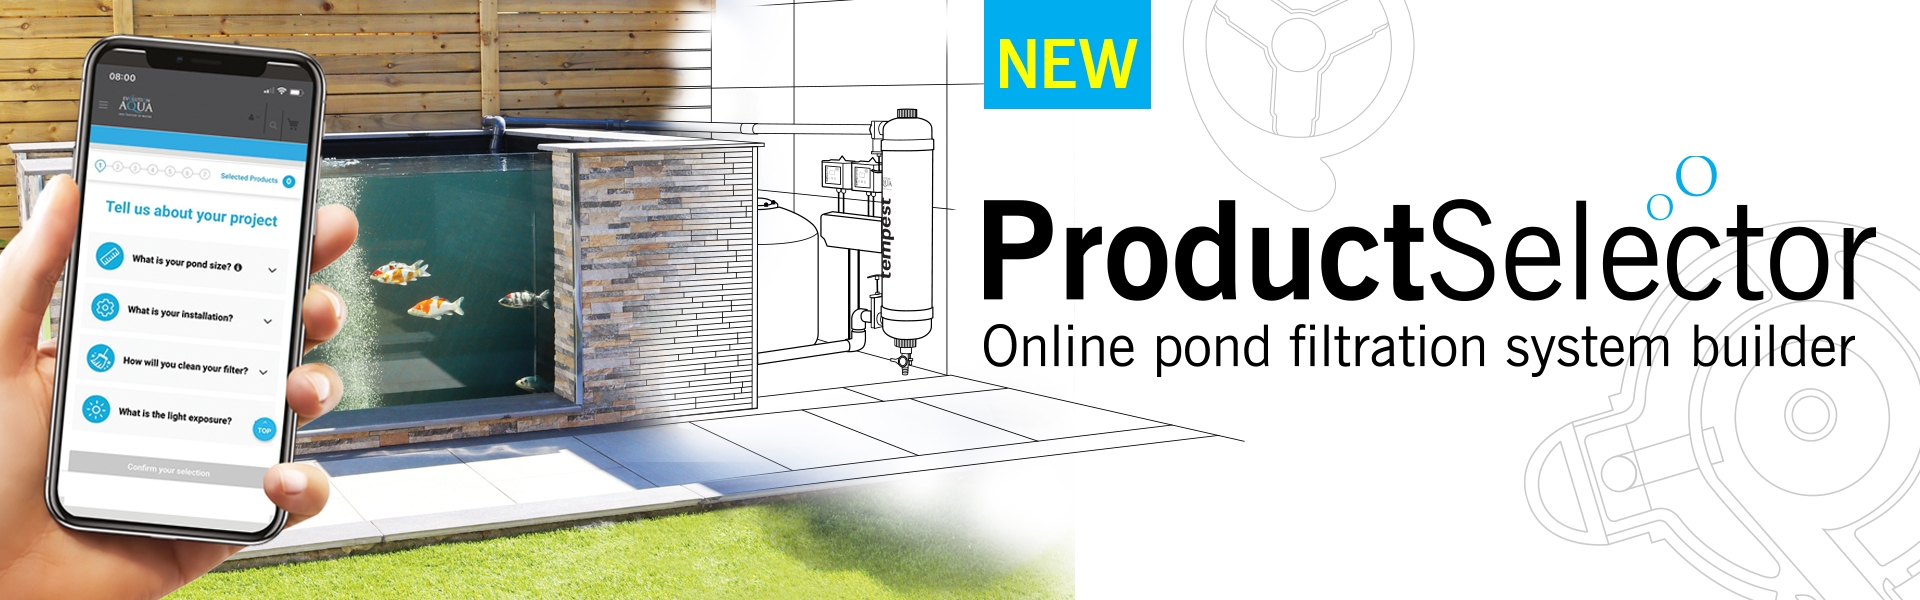 Pond Product Selector